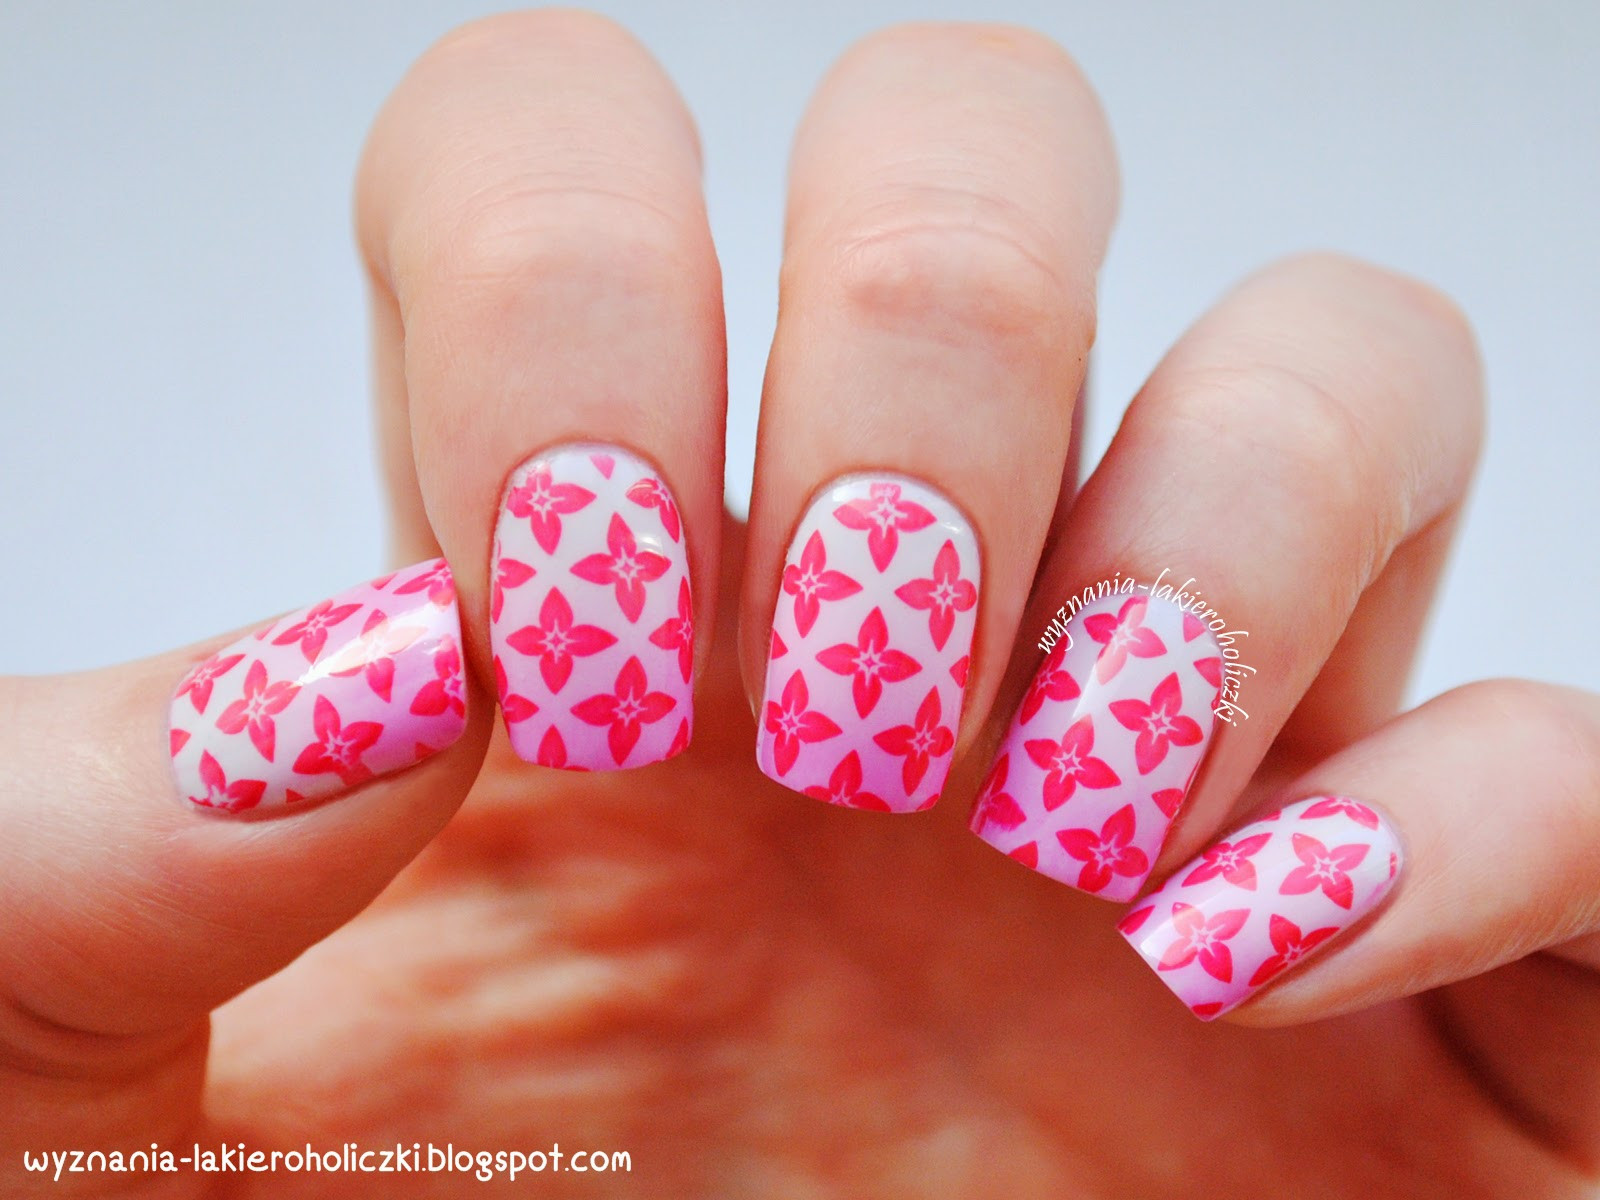 Most Beautiful Nails In The World
 Born Pretty Store Blog Amazing Nail Art Show For February 1